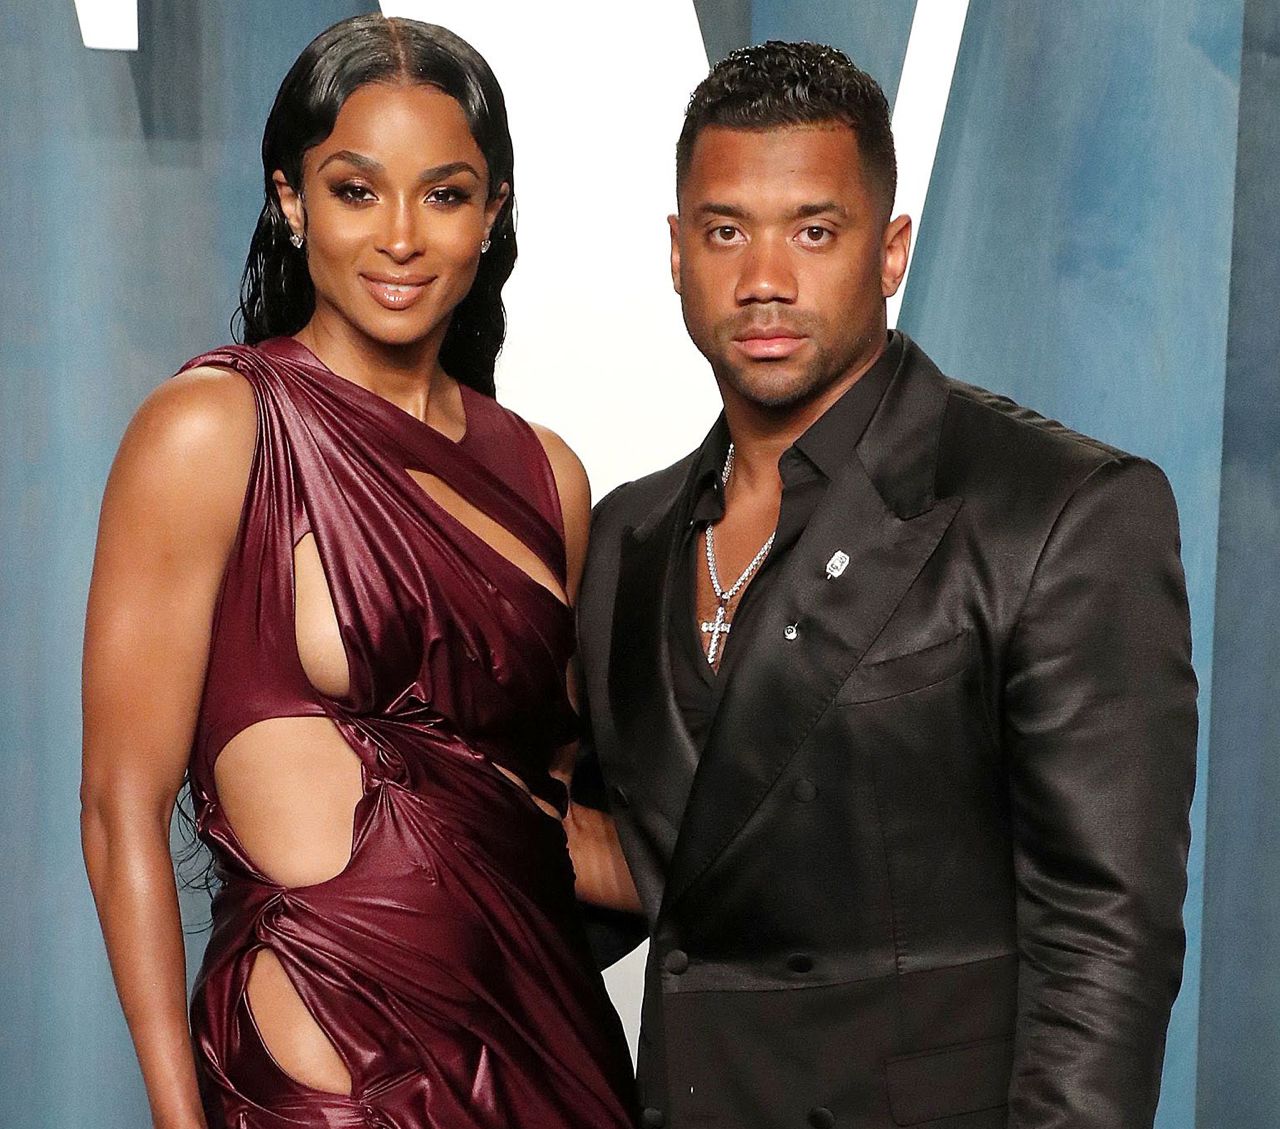 Ciara Is Pregnant With Her Third Child, her Second with Russell